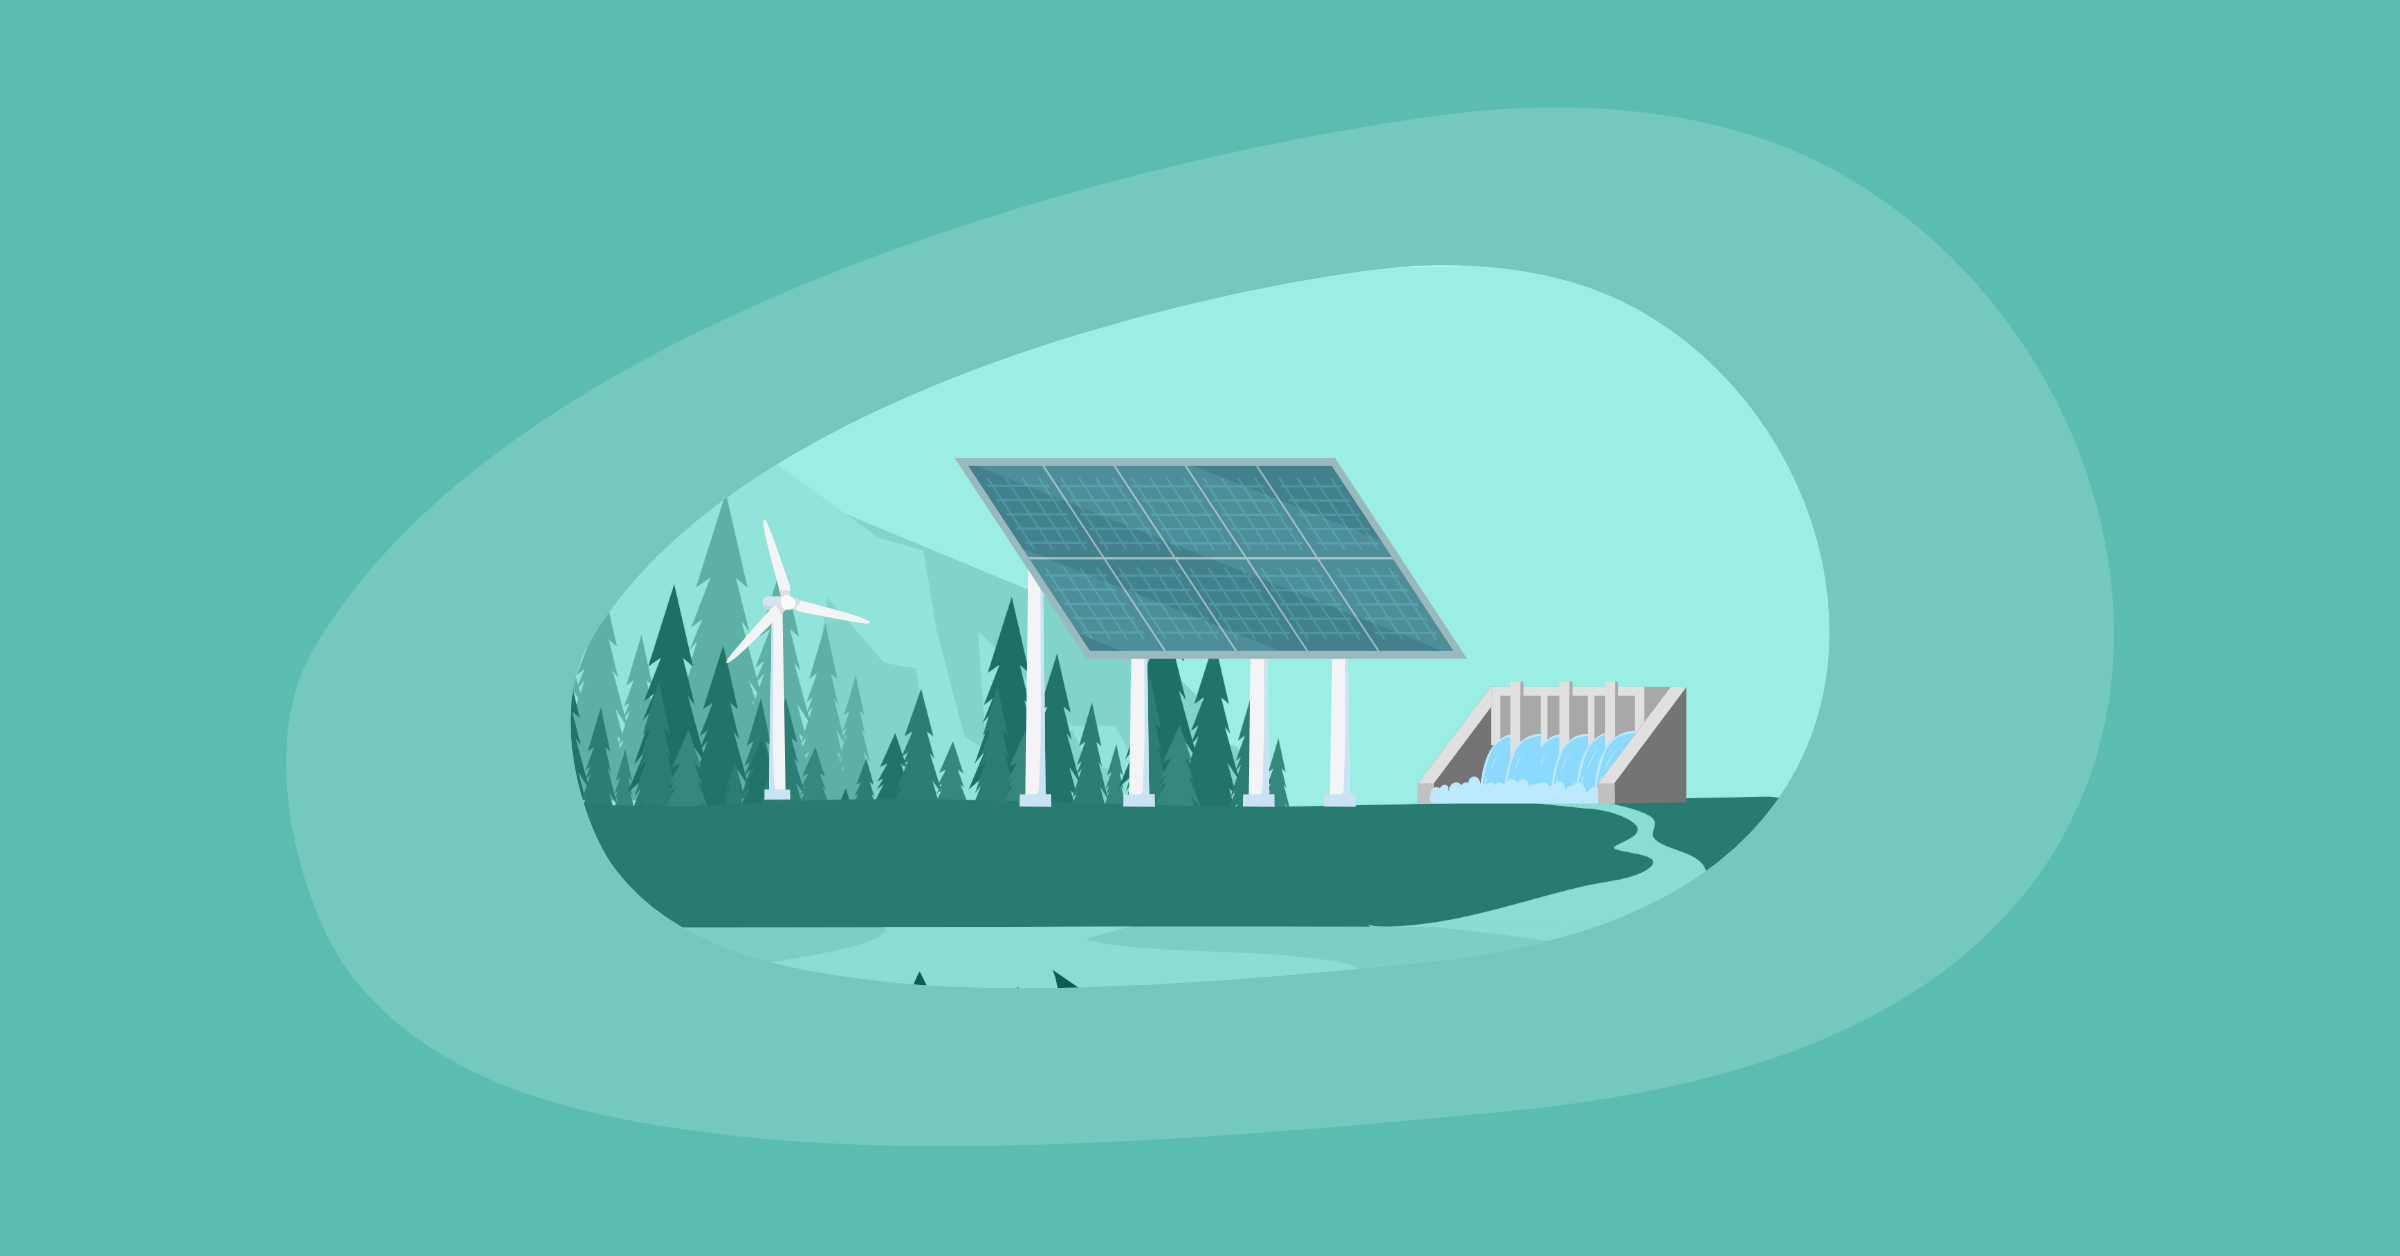 Illustration of green and sustainable energy